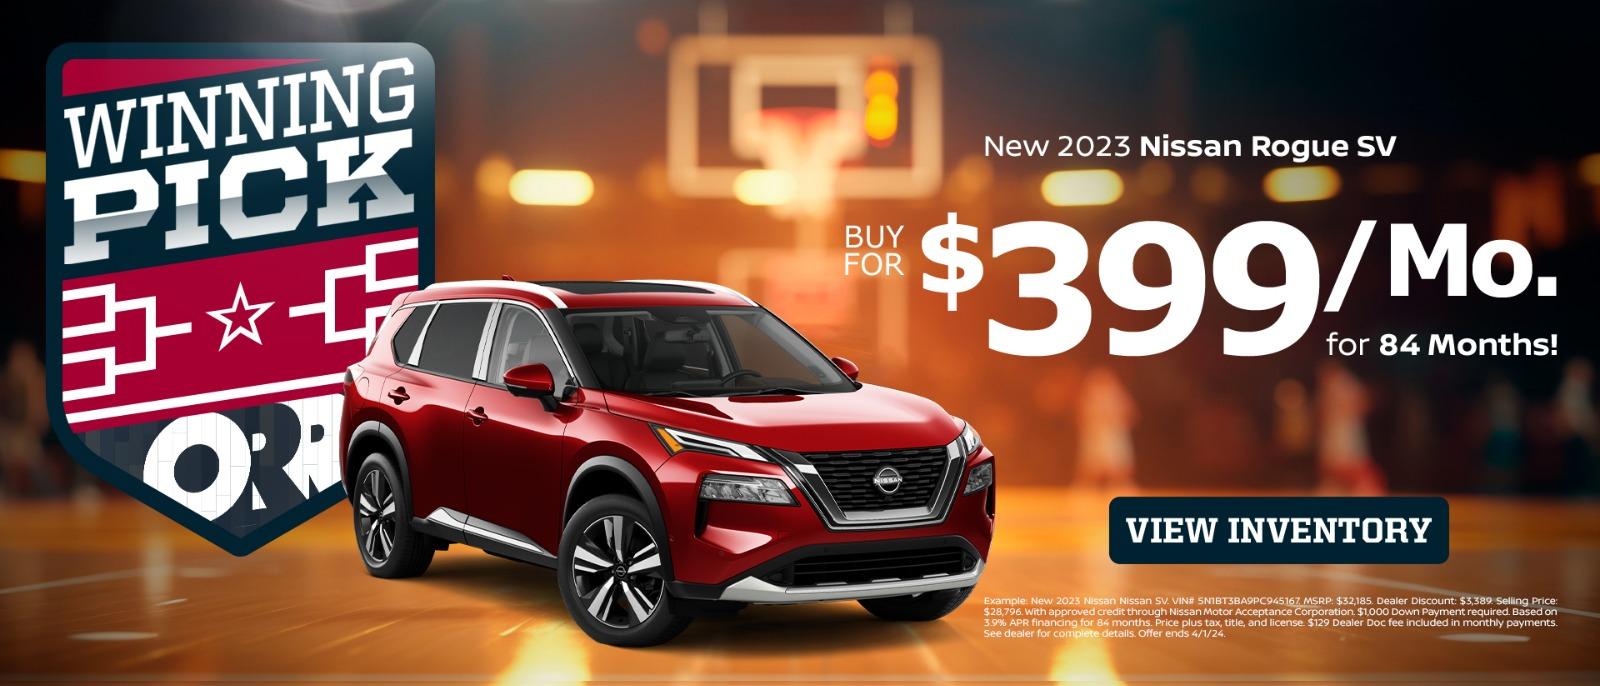 New 2023 Nissan Rogue SV
1.9% APR Financing for 60 months OR 2.9% APR Financing for 72 months OR
3.9% APR Financing for 84 months OR $2,000 NMAC Retail Cash